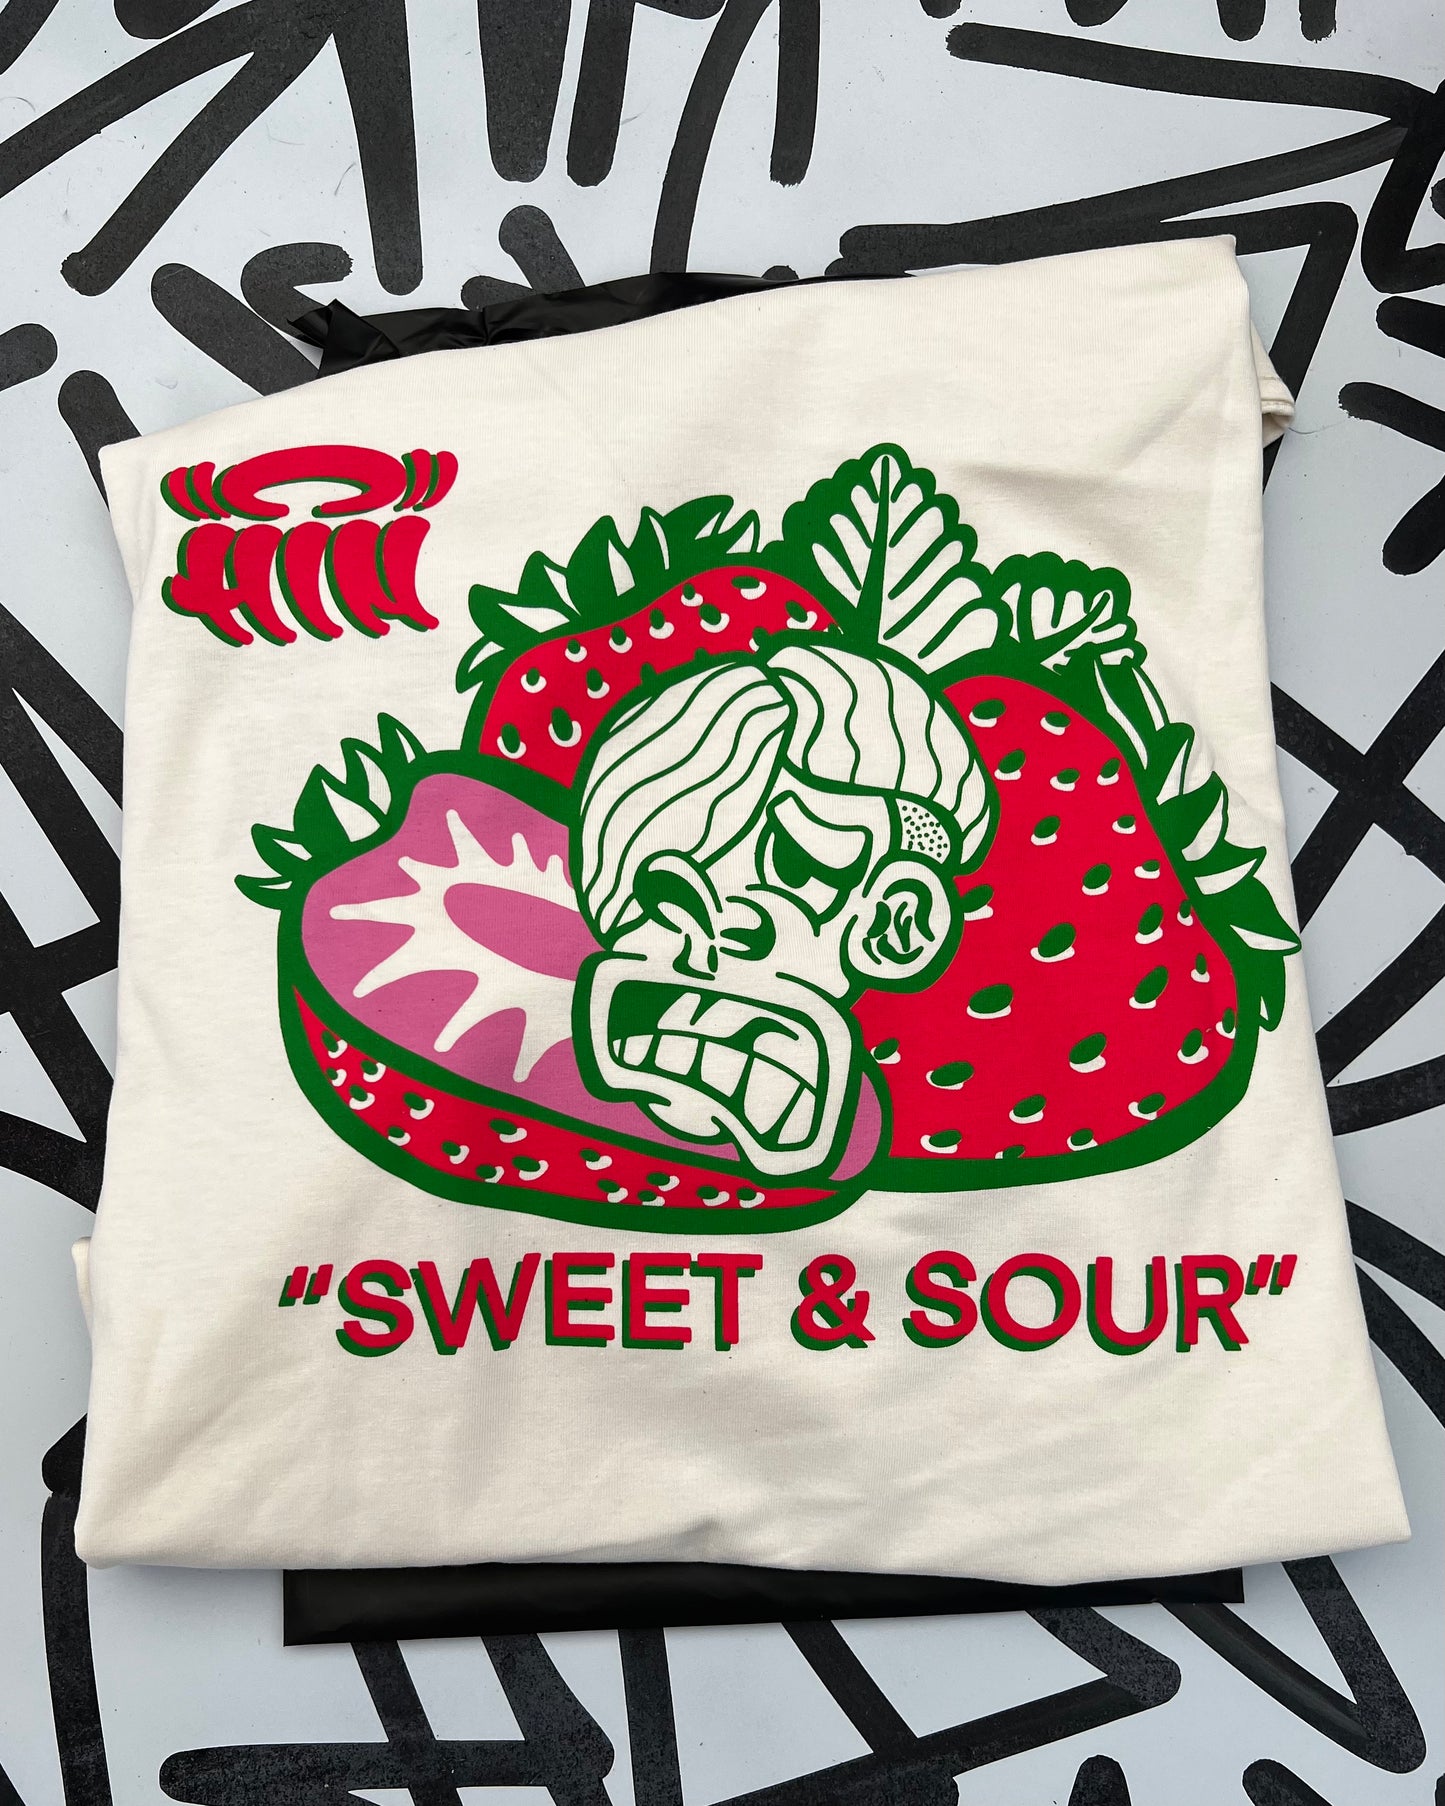 Sweet and sour strawberry